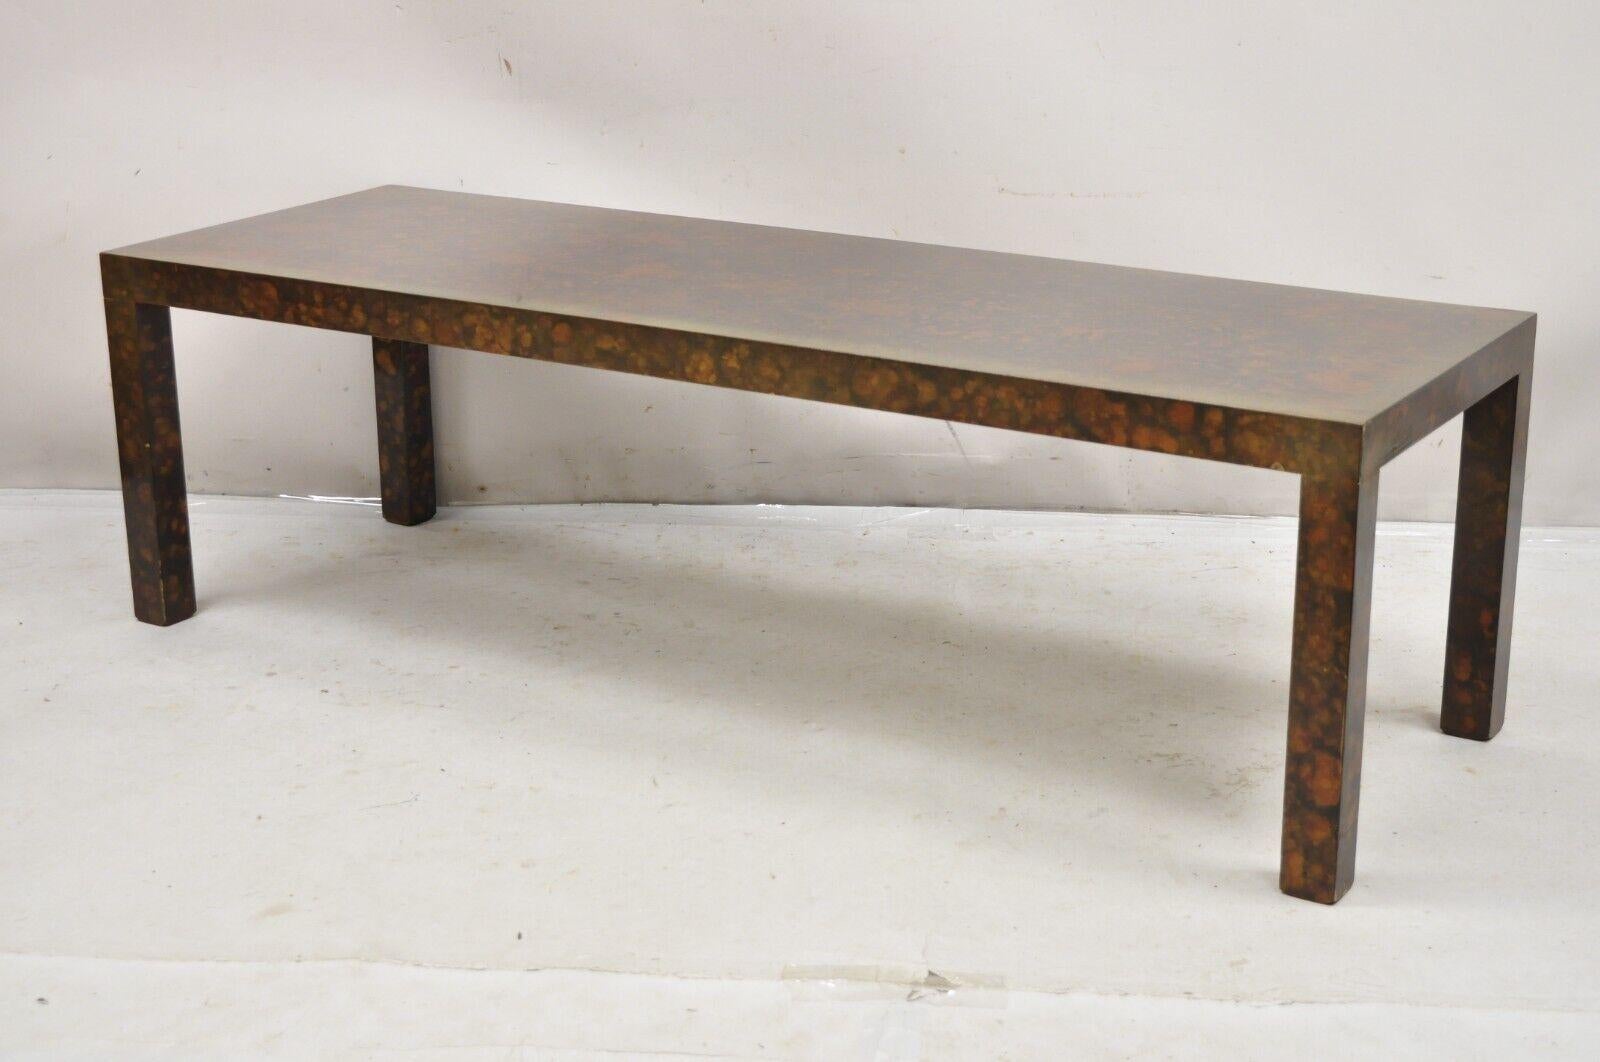 Vintage Mid Century Modern Brown Tortoiseshell Lacquer Parsons Style Bench / Coffee Table. Circa Mid to Late 20th Century.
Measurements: 19